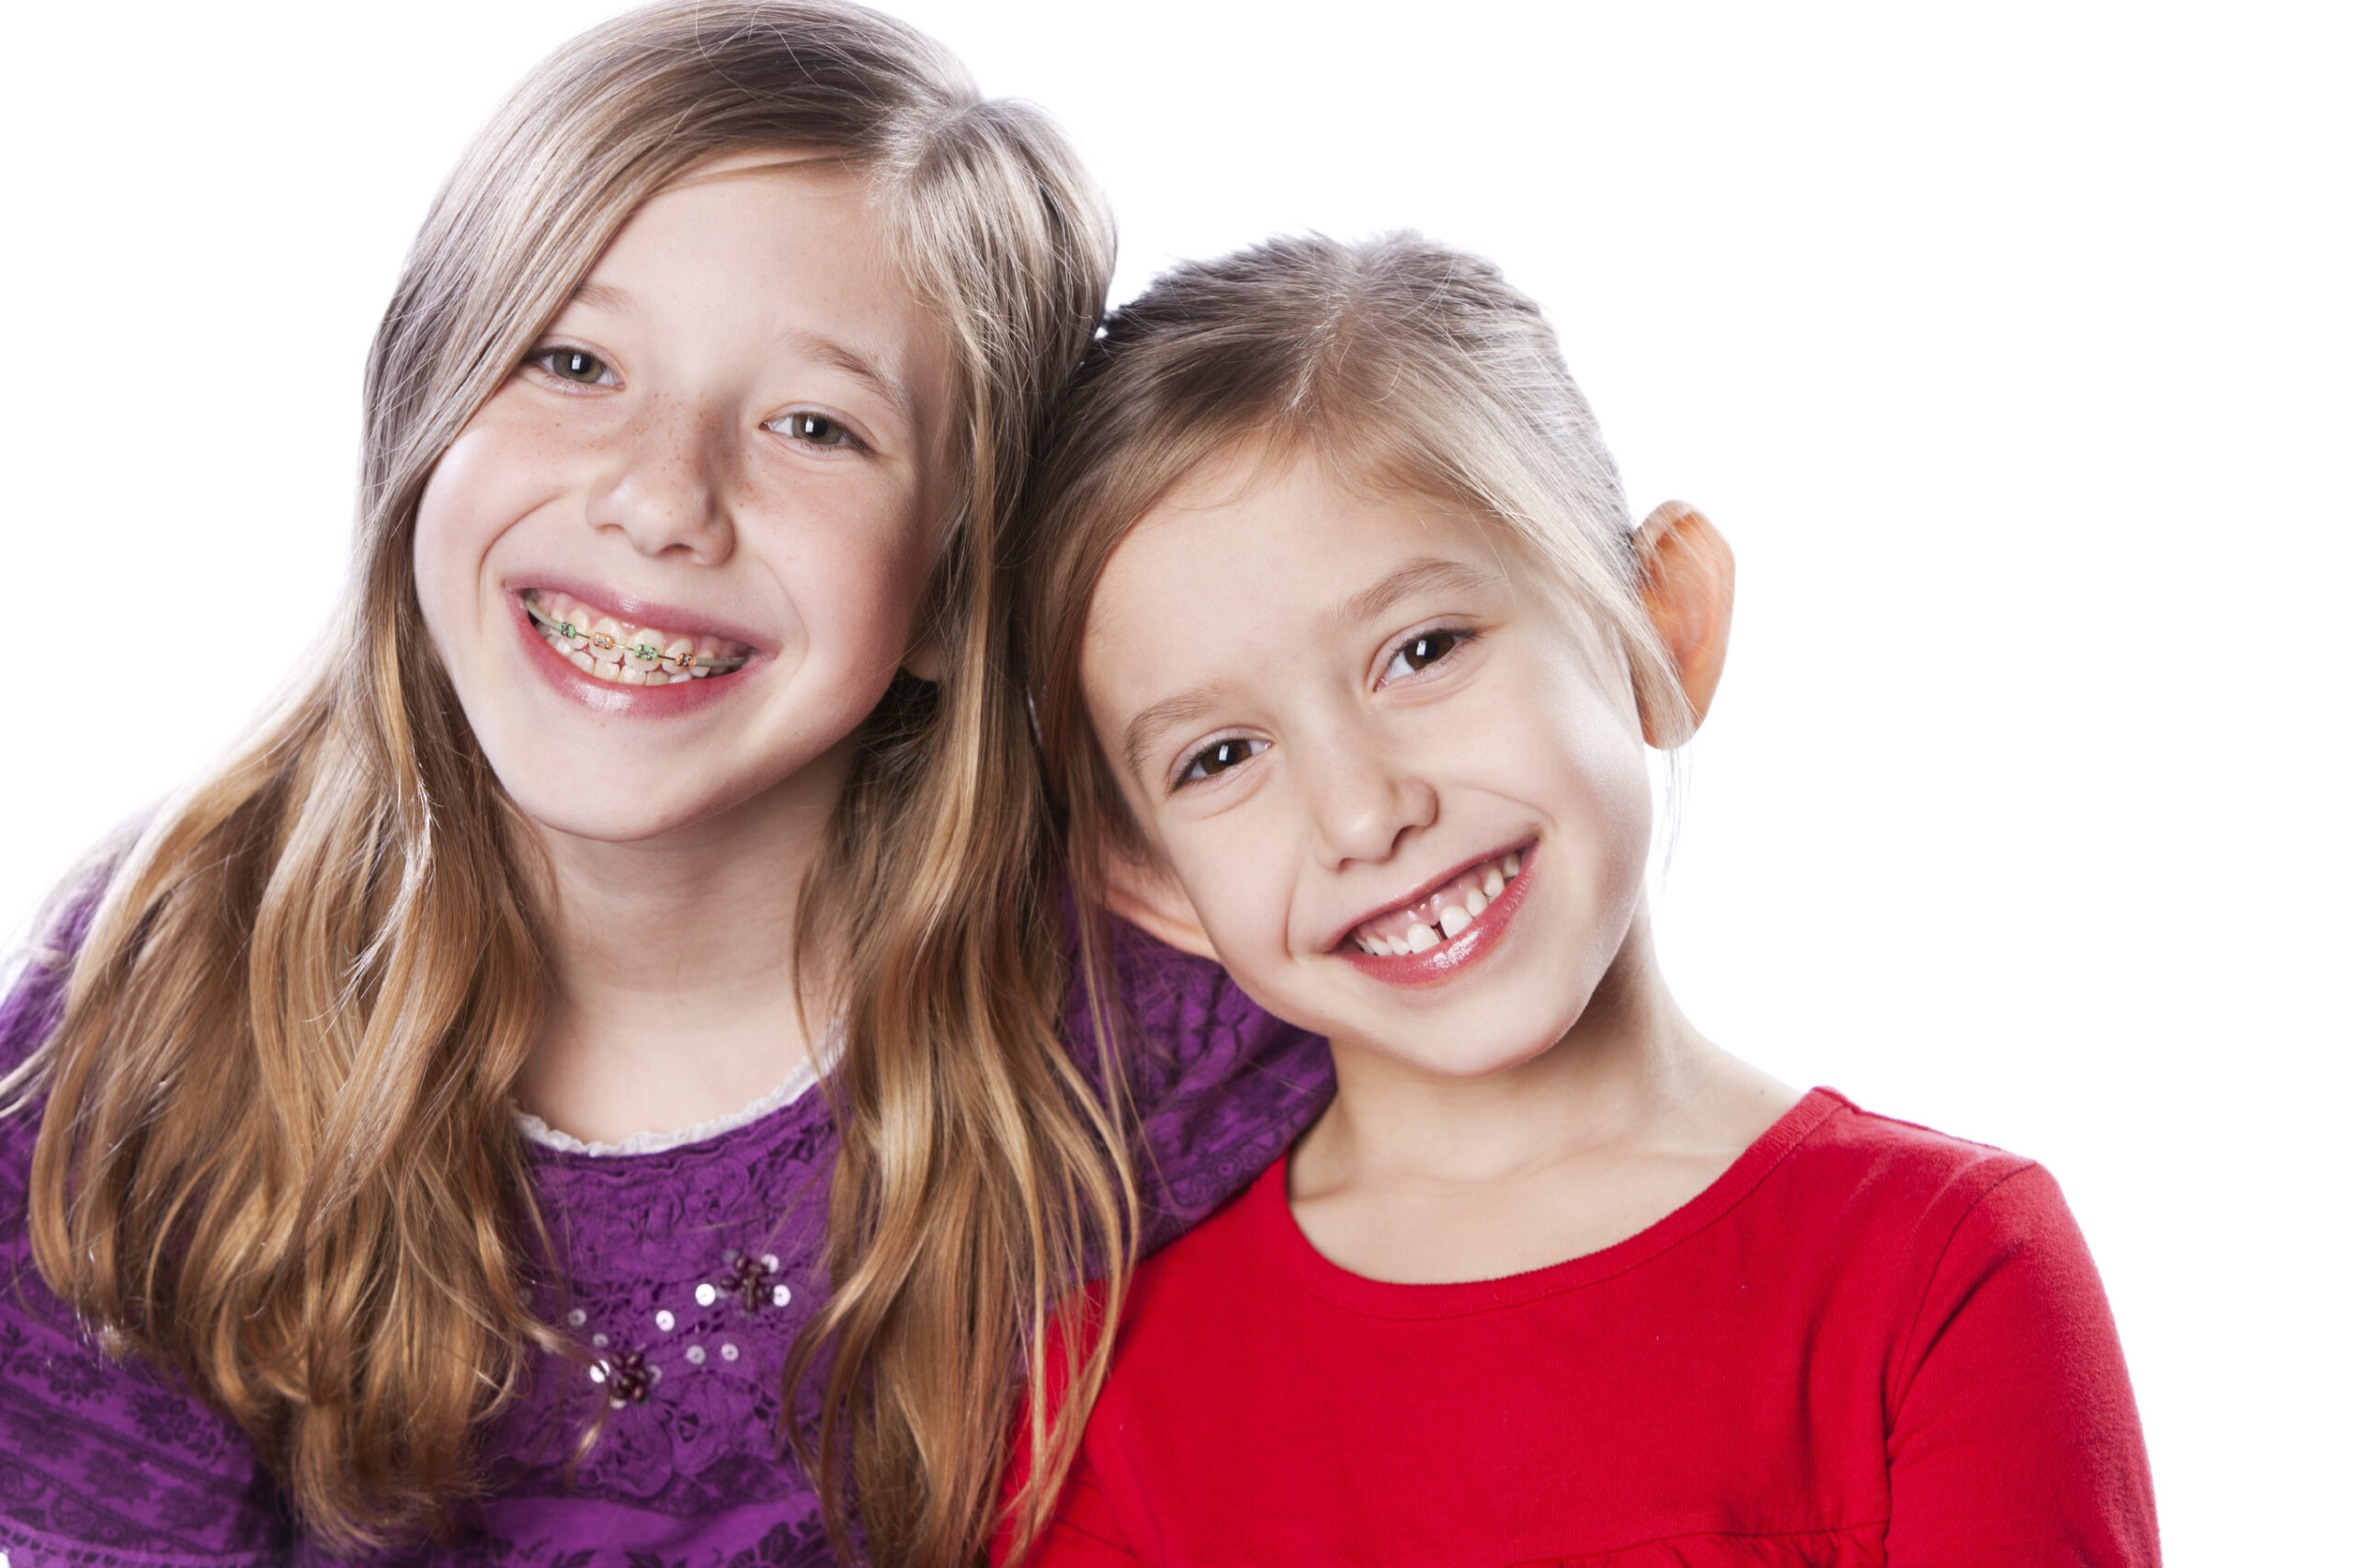 Featured image for “When is the Right Time to Screen My Children for Their Orthodontic Needs?”